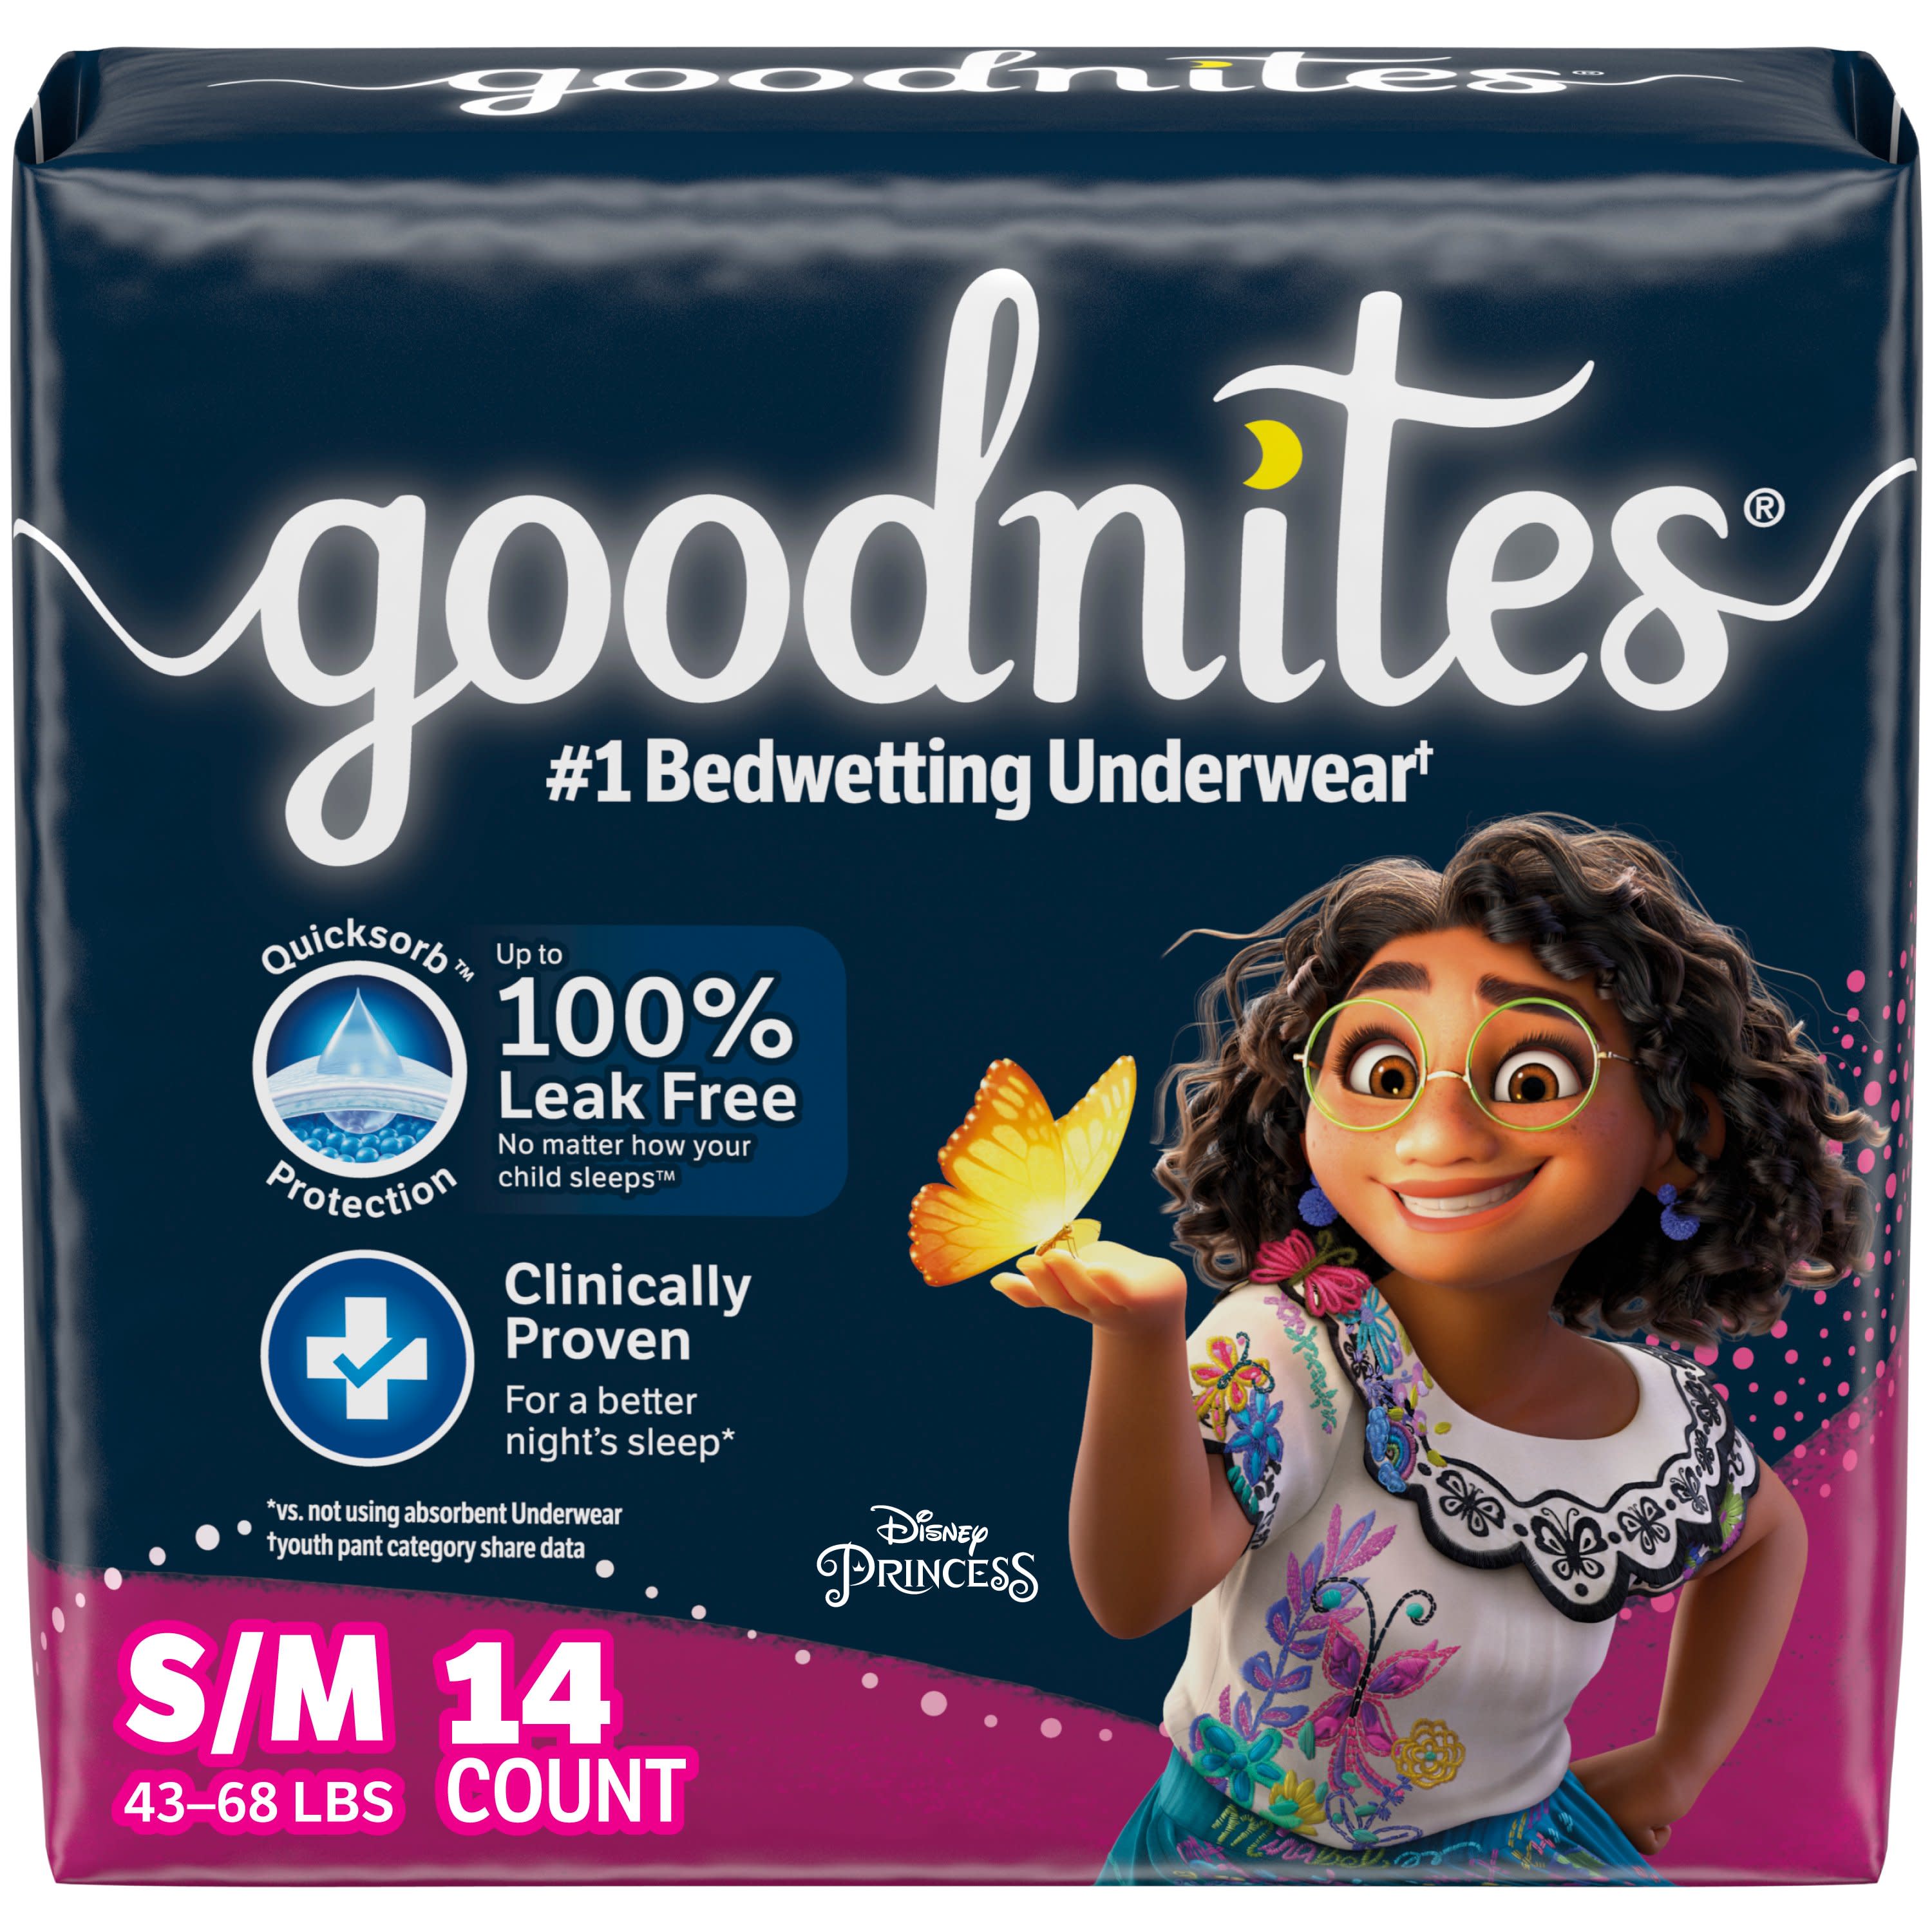 Goodnites Nighttime Bedwetting Underwear for Girls, S/M, 14 Ct (Select for More Options) - image 3 of 10